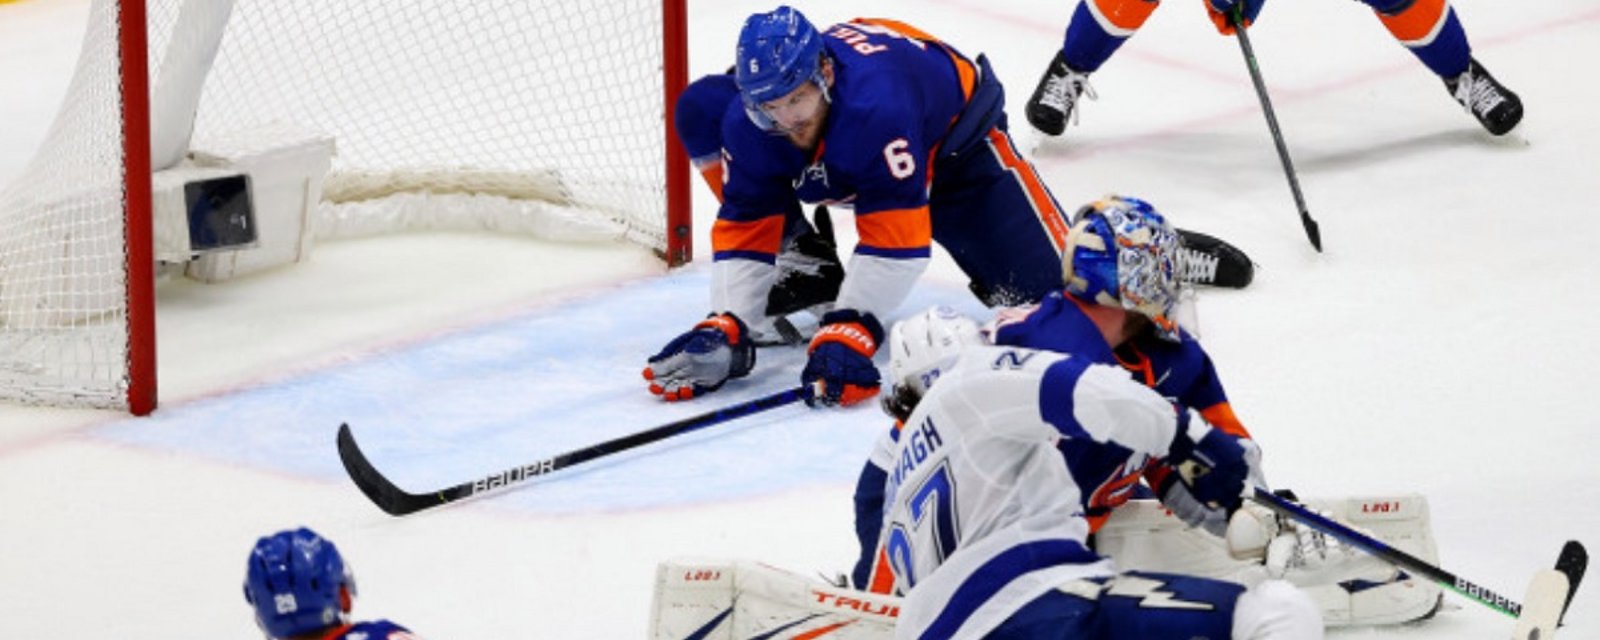 ICYMI: Ryan Pulock's game-saving save with just 2 seconds on the clock.